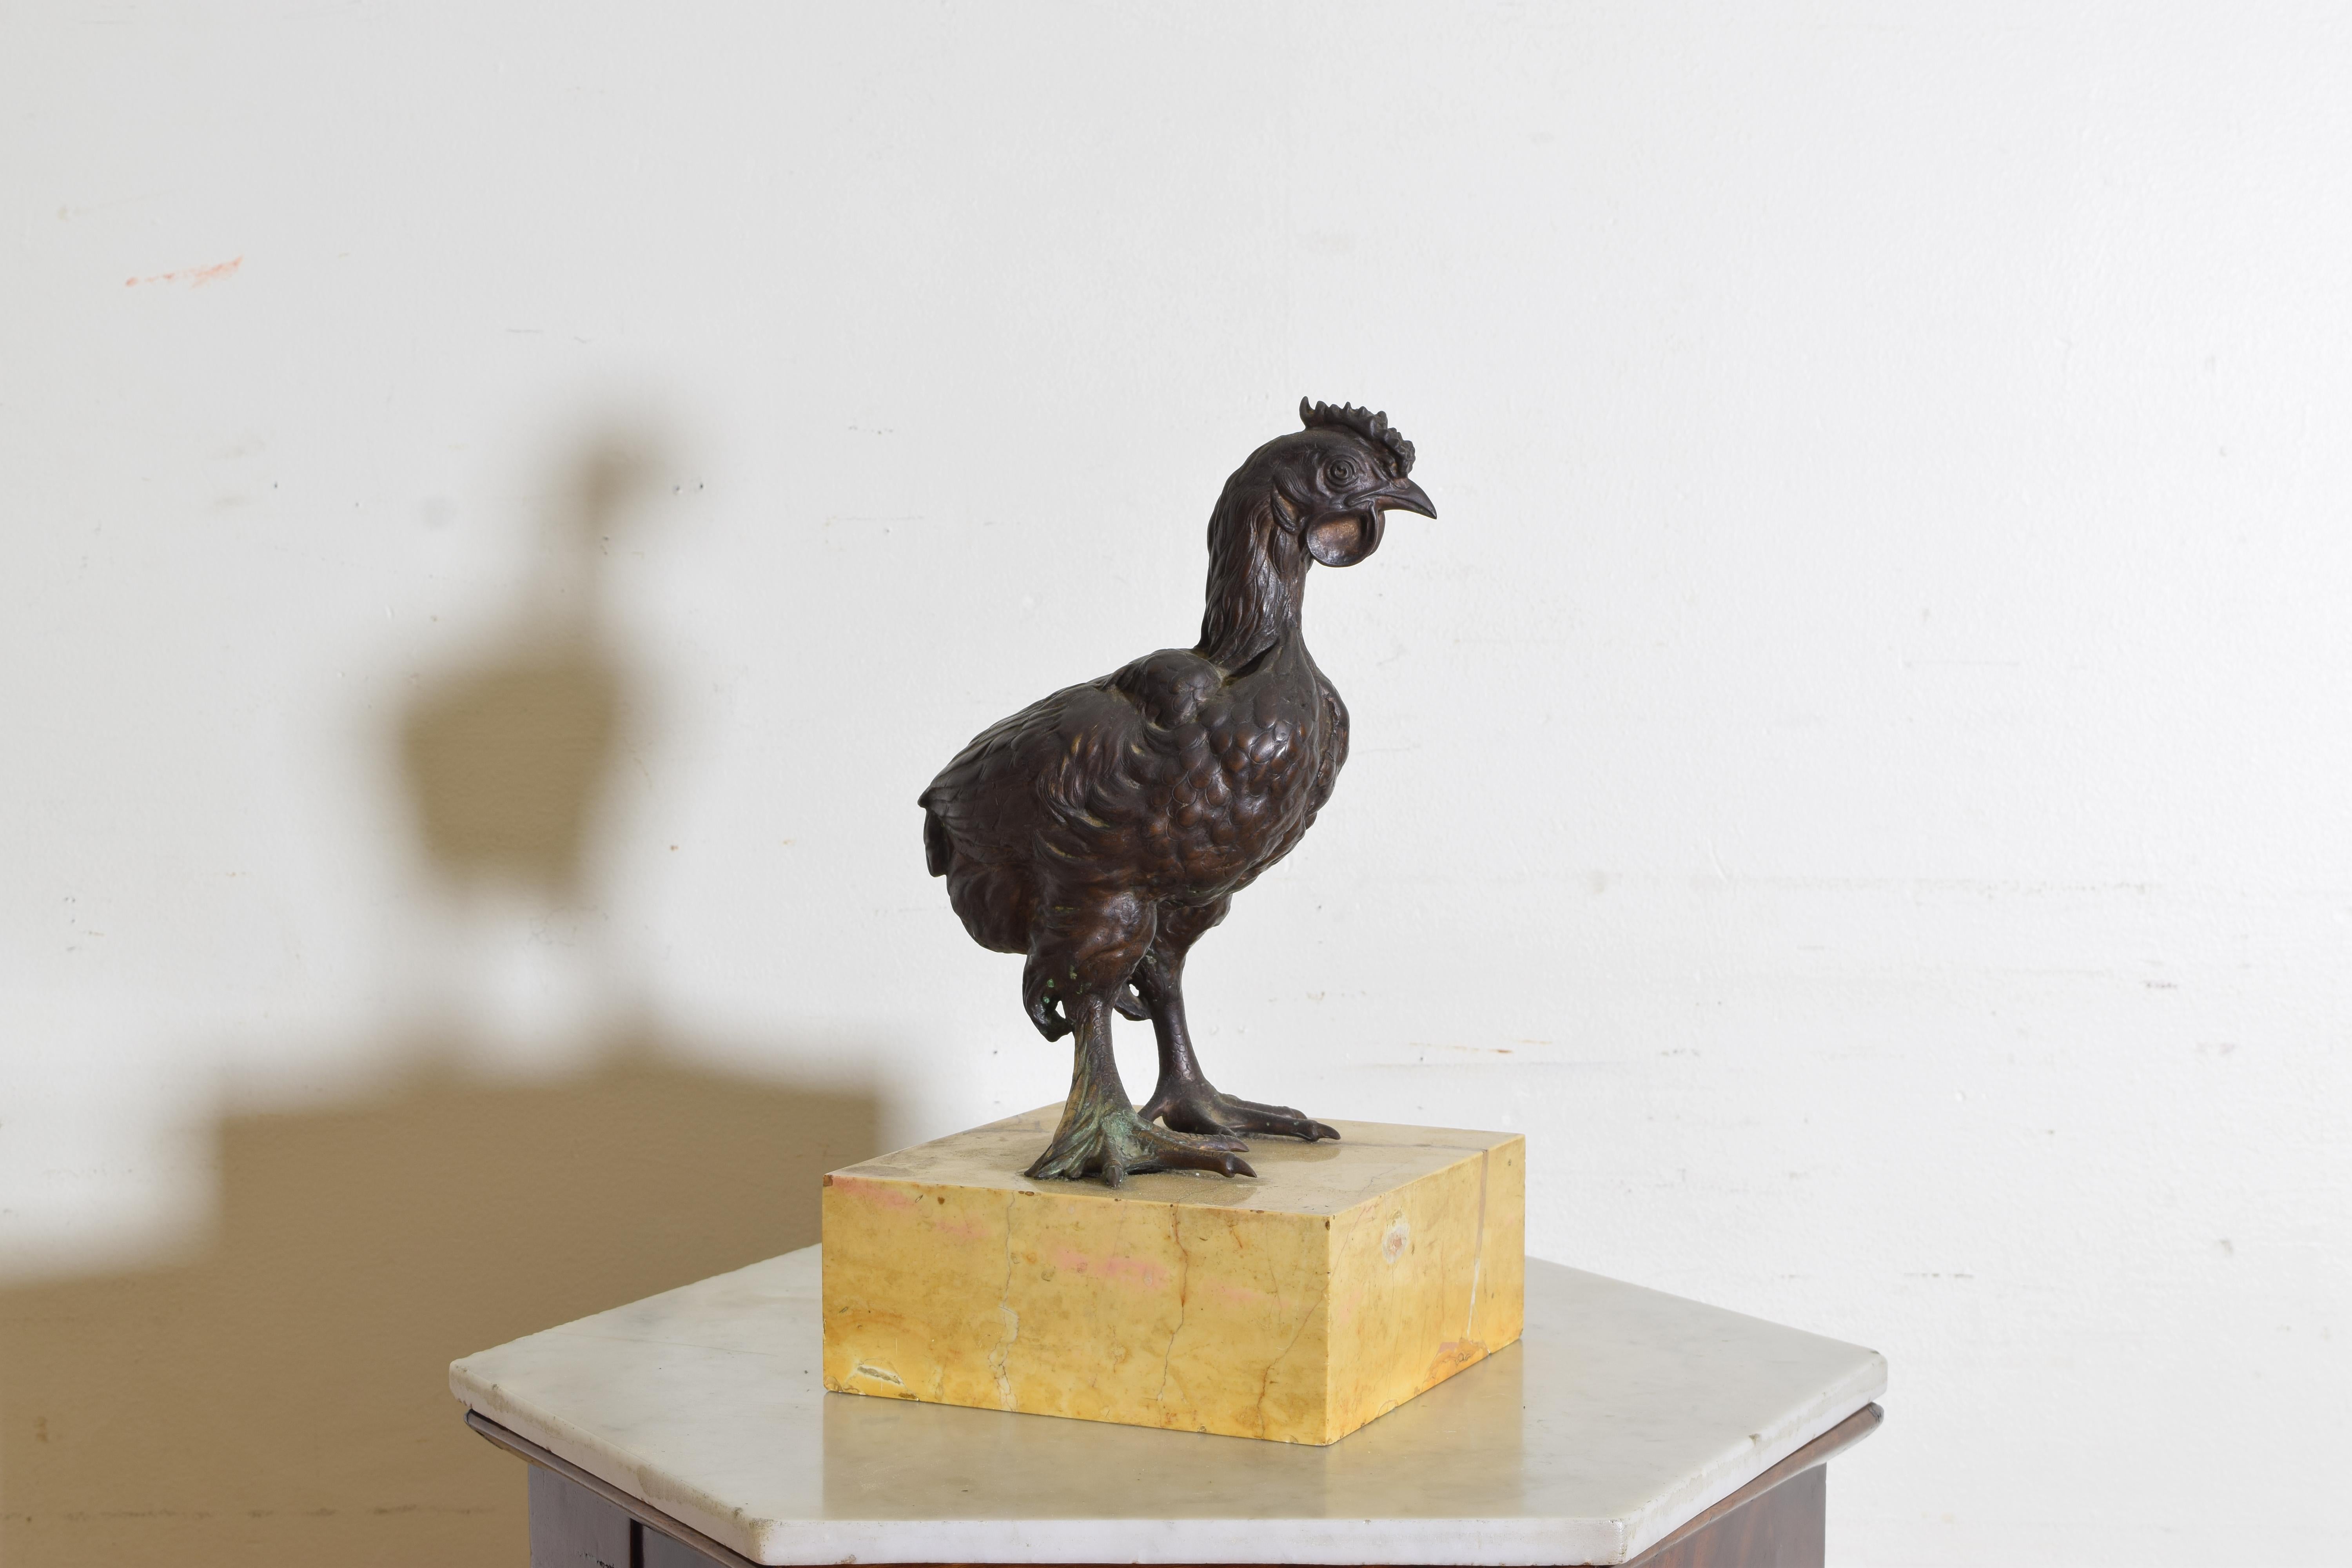 The upright young rooster gazing slightly to its left, its webbed feet mounted firmly atop a rectangular solid marble base.